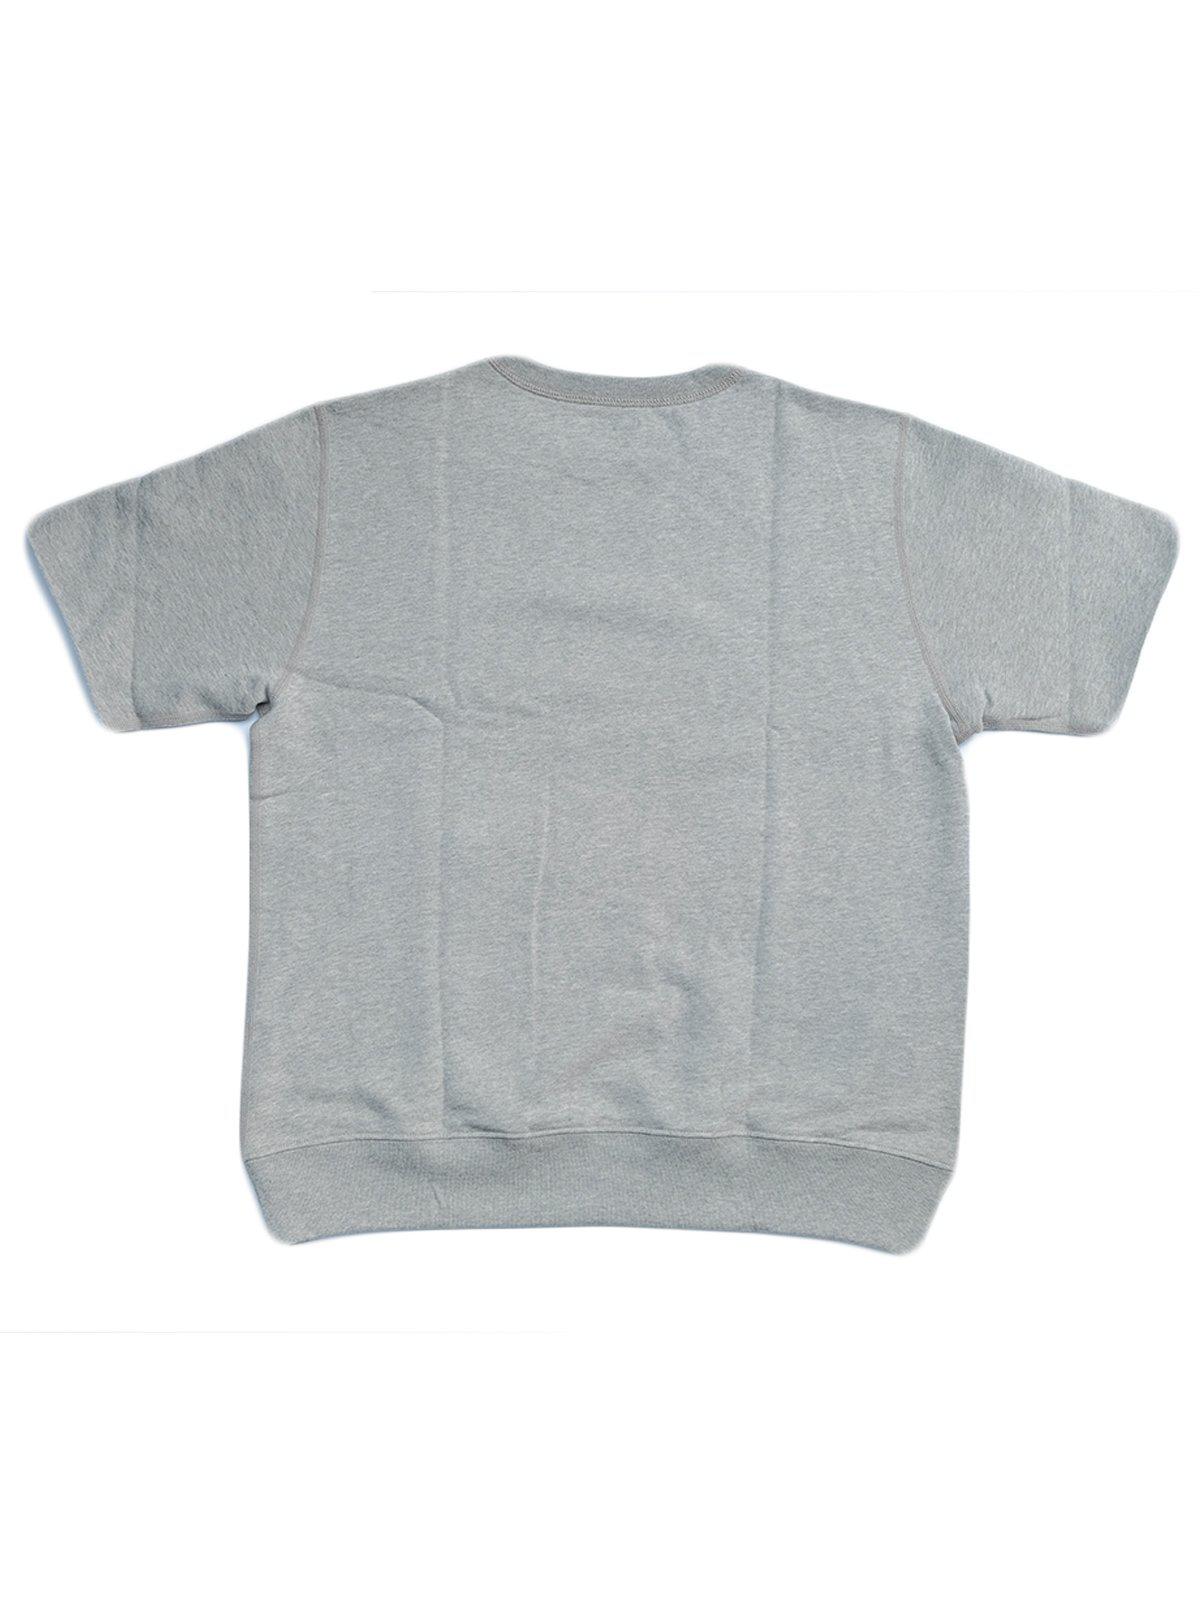 Lady White Co. Short Sleeve Crewneck Heather Grey - MORE by Morello Indonesia